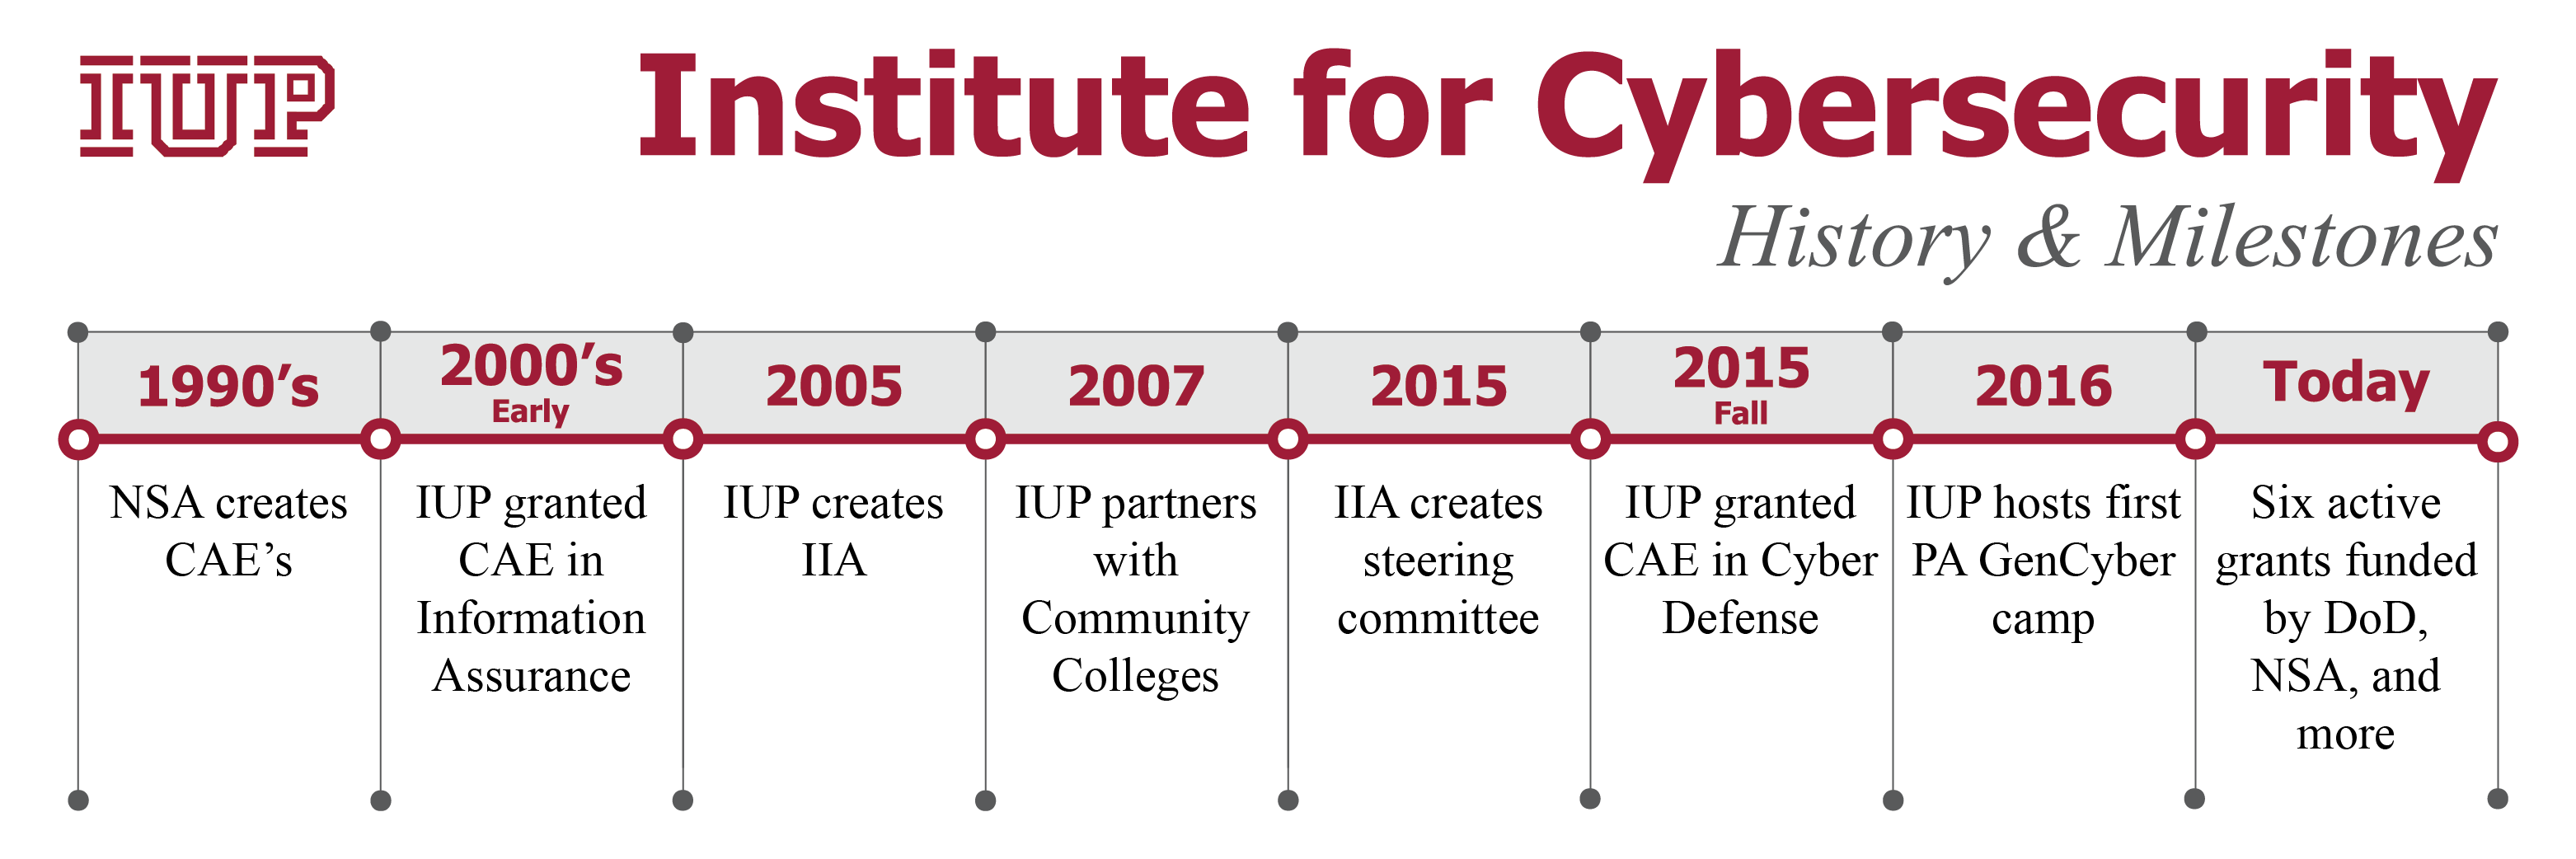 Graphic showing the history of the Institute for Cybersecurity